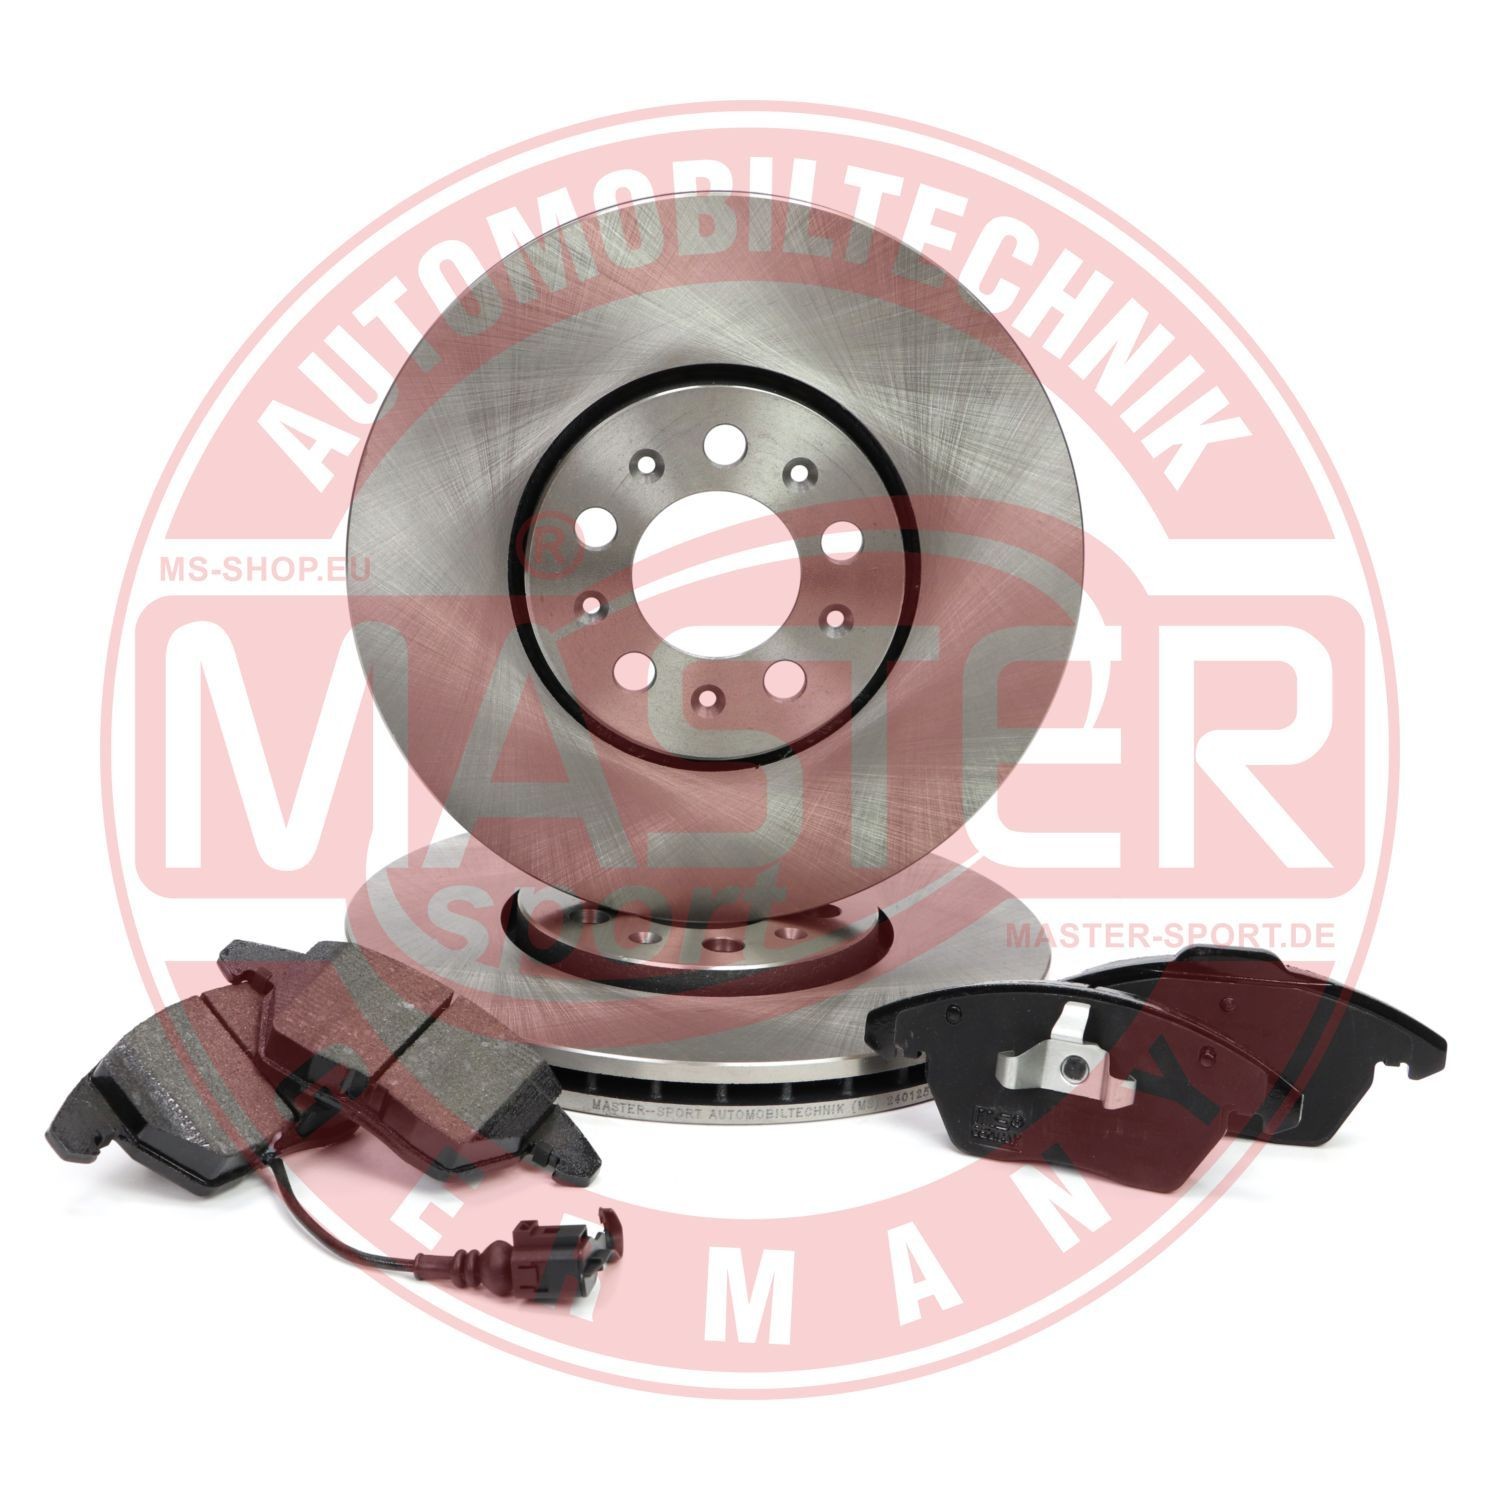 MASTER-SPORT 202501131 Brake discs and pads set Front Axle, Vented, incl. wear warning contact